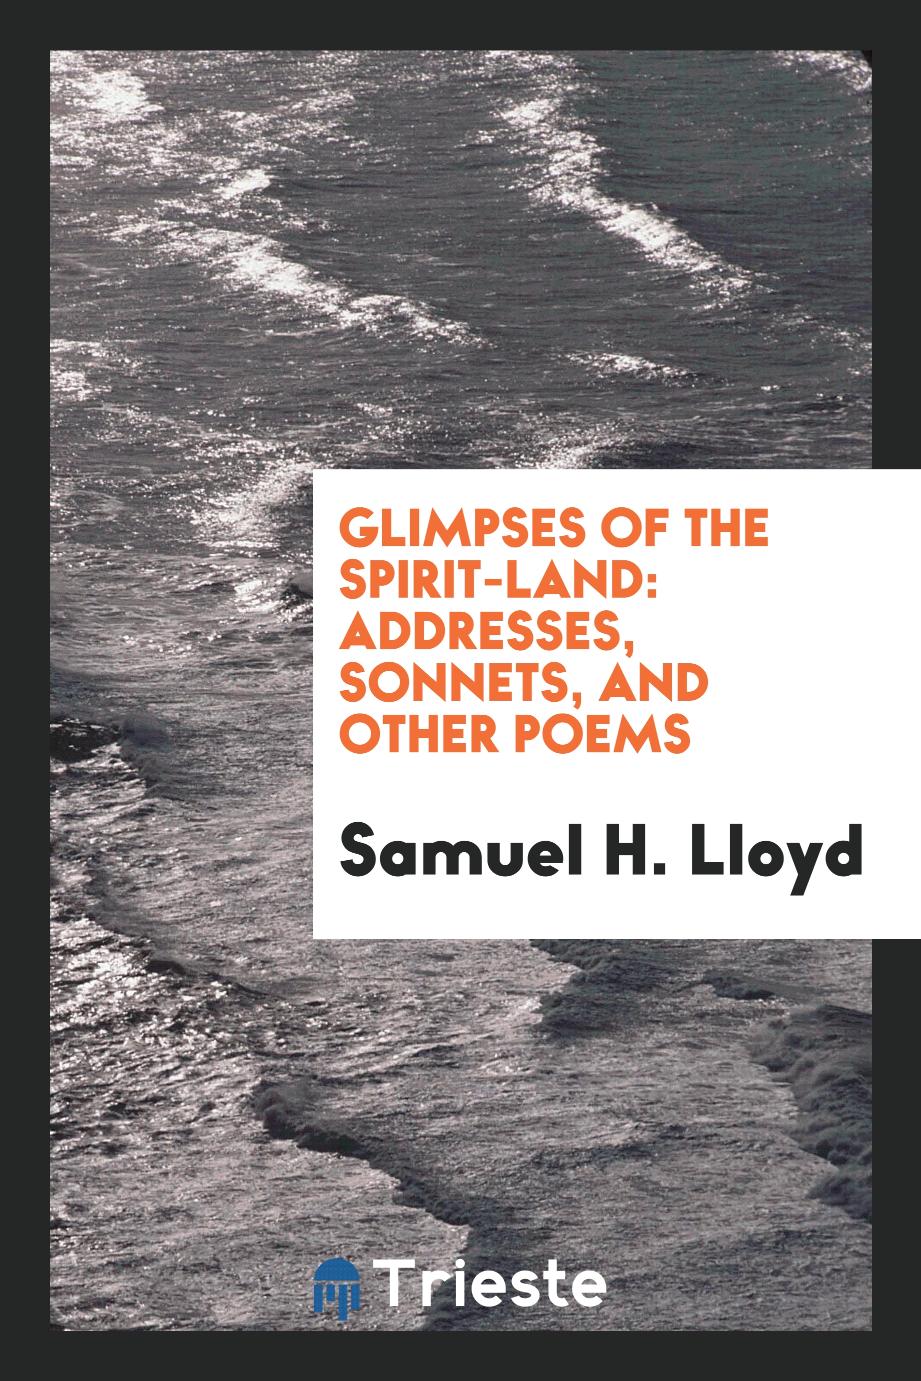 Glimpses of the Spirit-Land: Addresses, Sonnets, and Other Poems